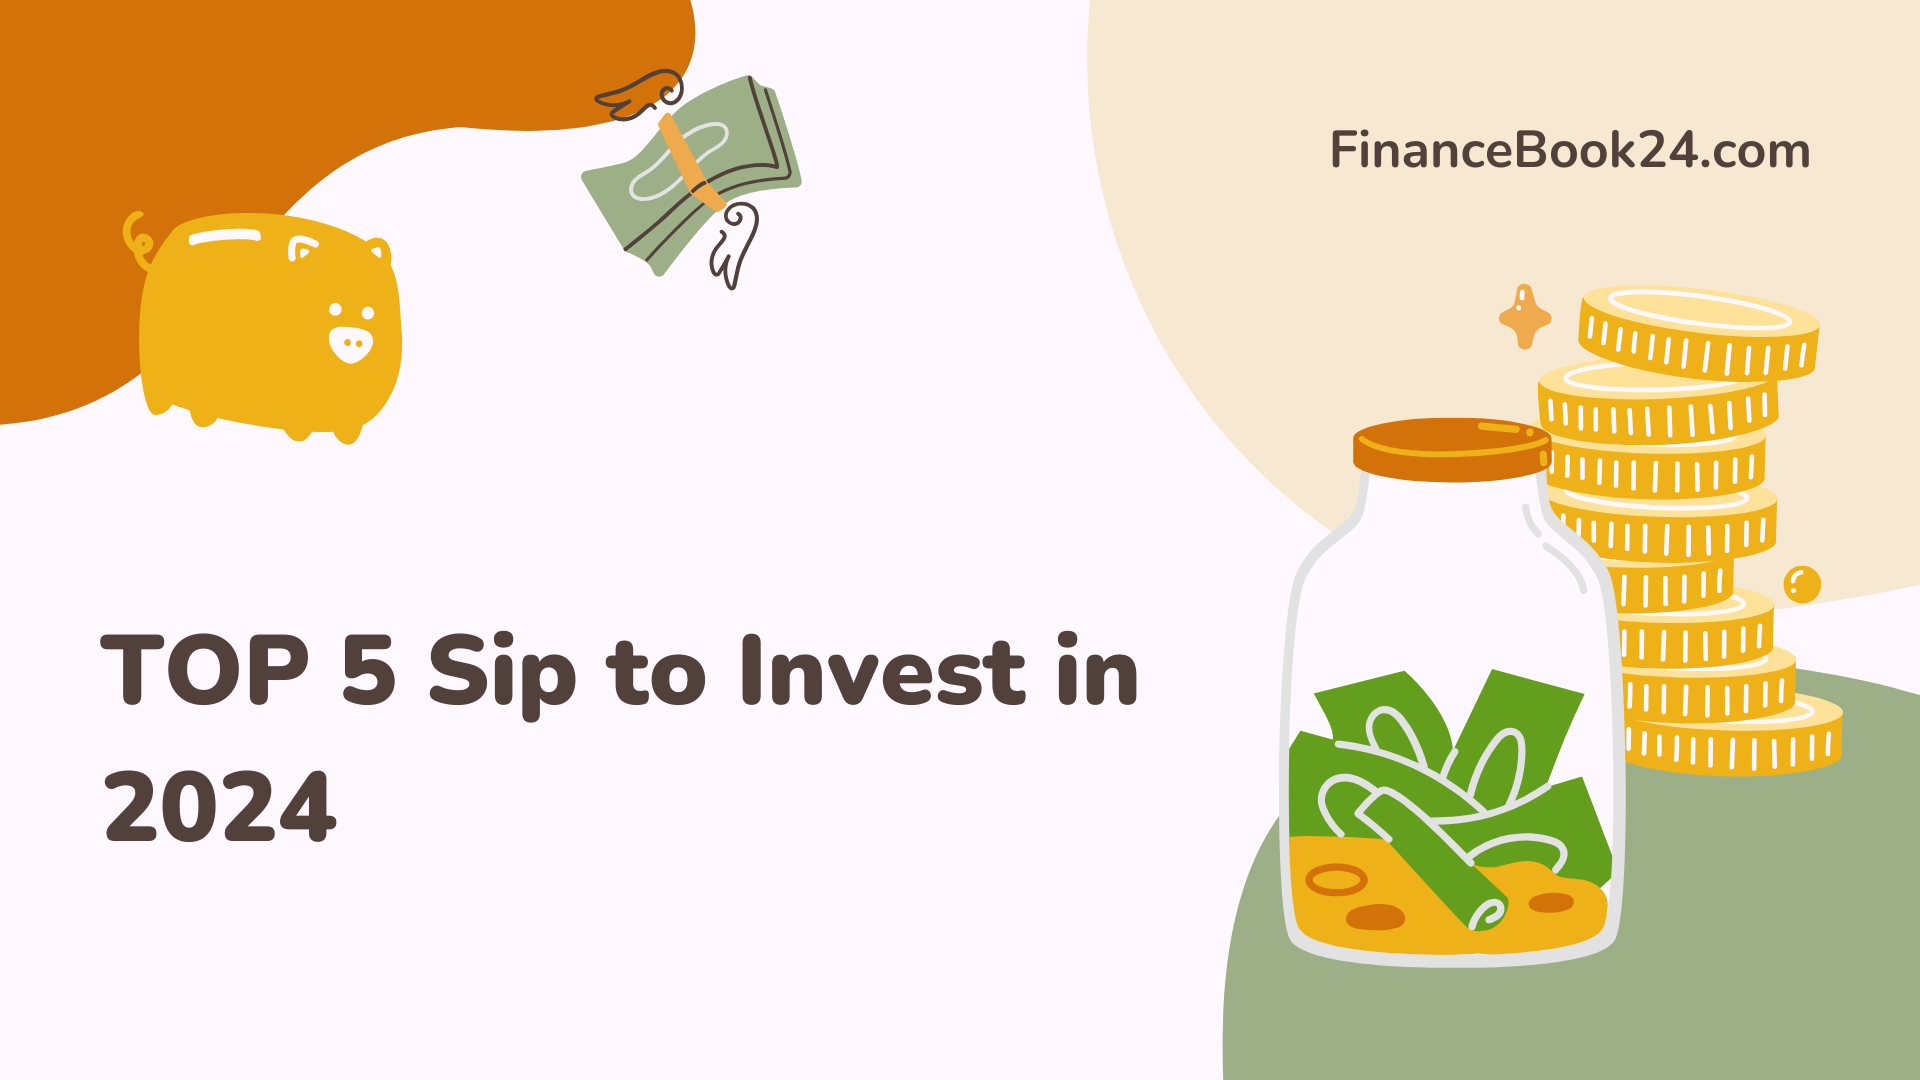 Top 5 Sip to Invest in 2024